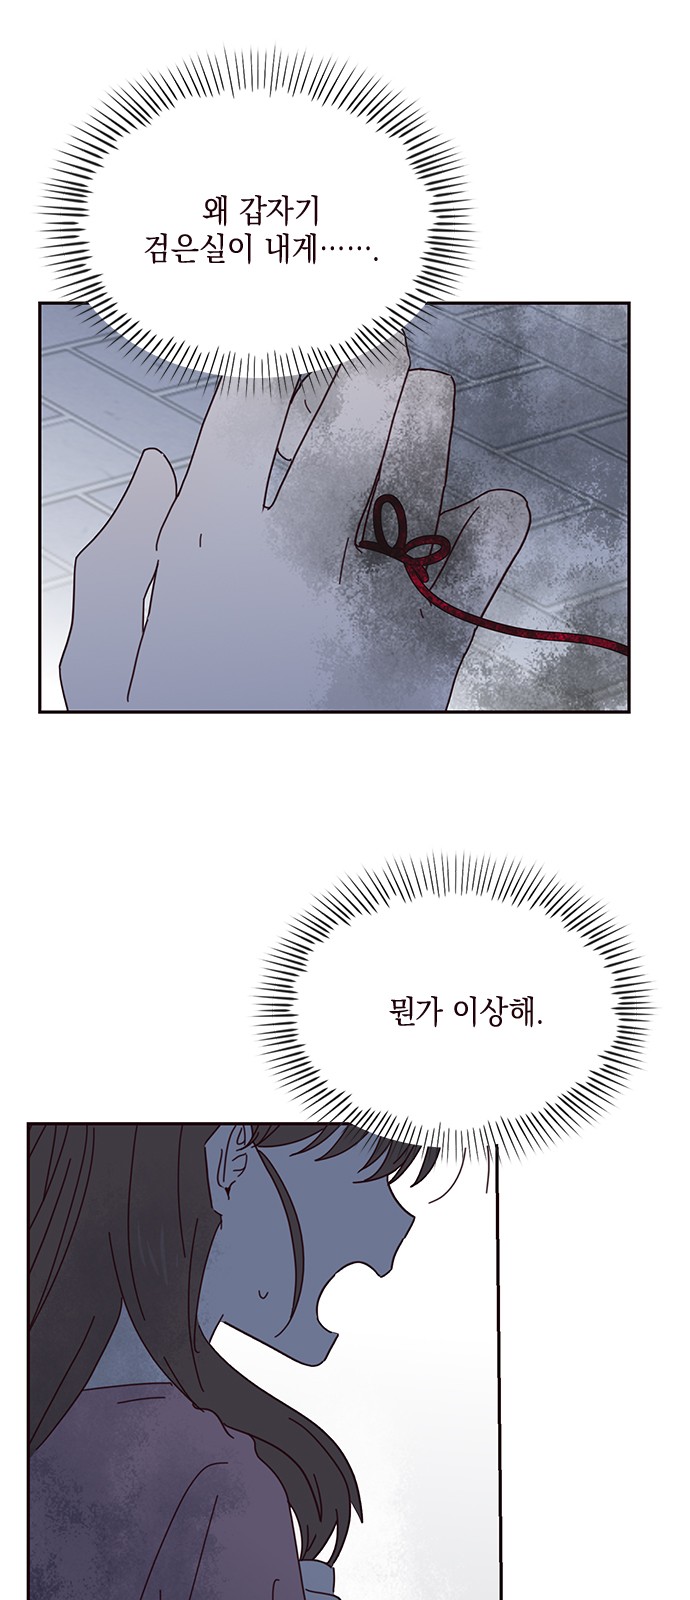 Threads of Love (The Fool of Love and Peace) - Chapter 61 - Page 3